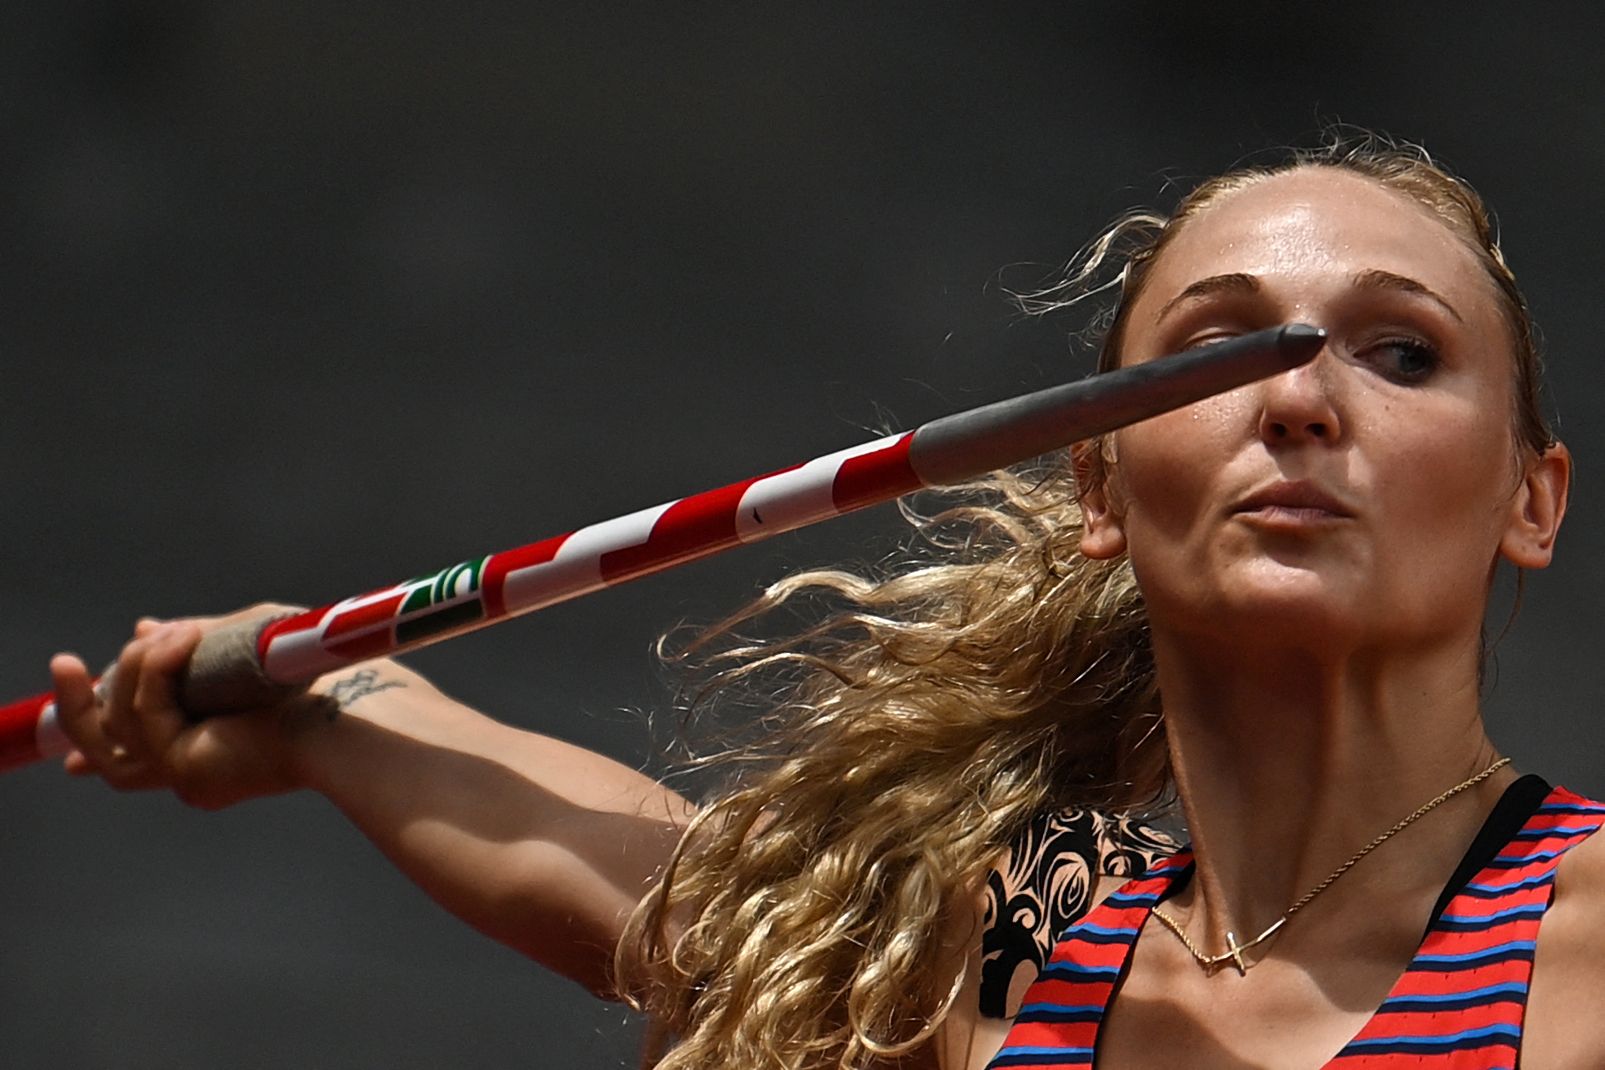 USA's Maggie Malone competes in the women's javelin throw qualification during the Tokyo 2020 Olympic Games at the Olympic Stadium in Tokyo on August 3